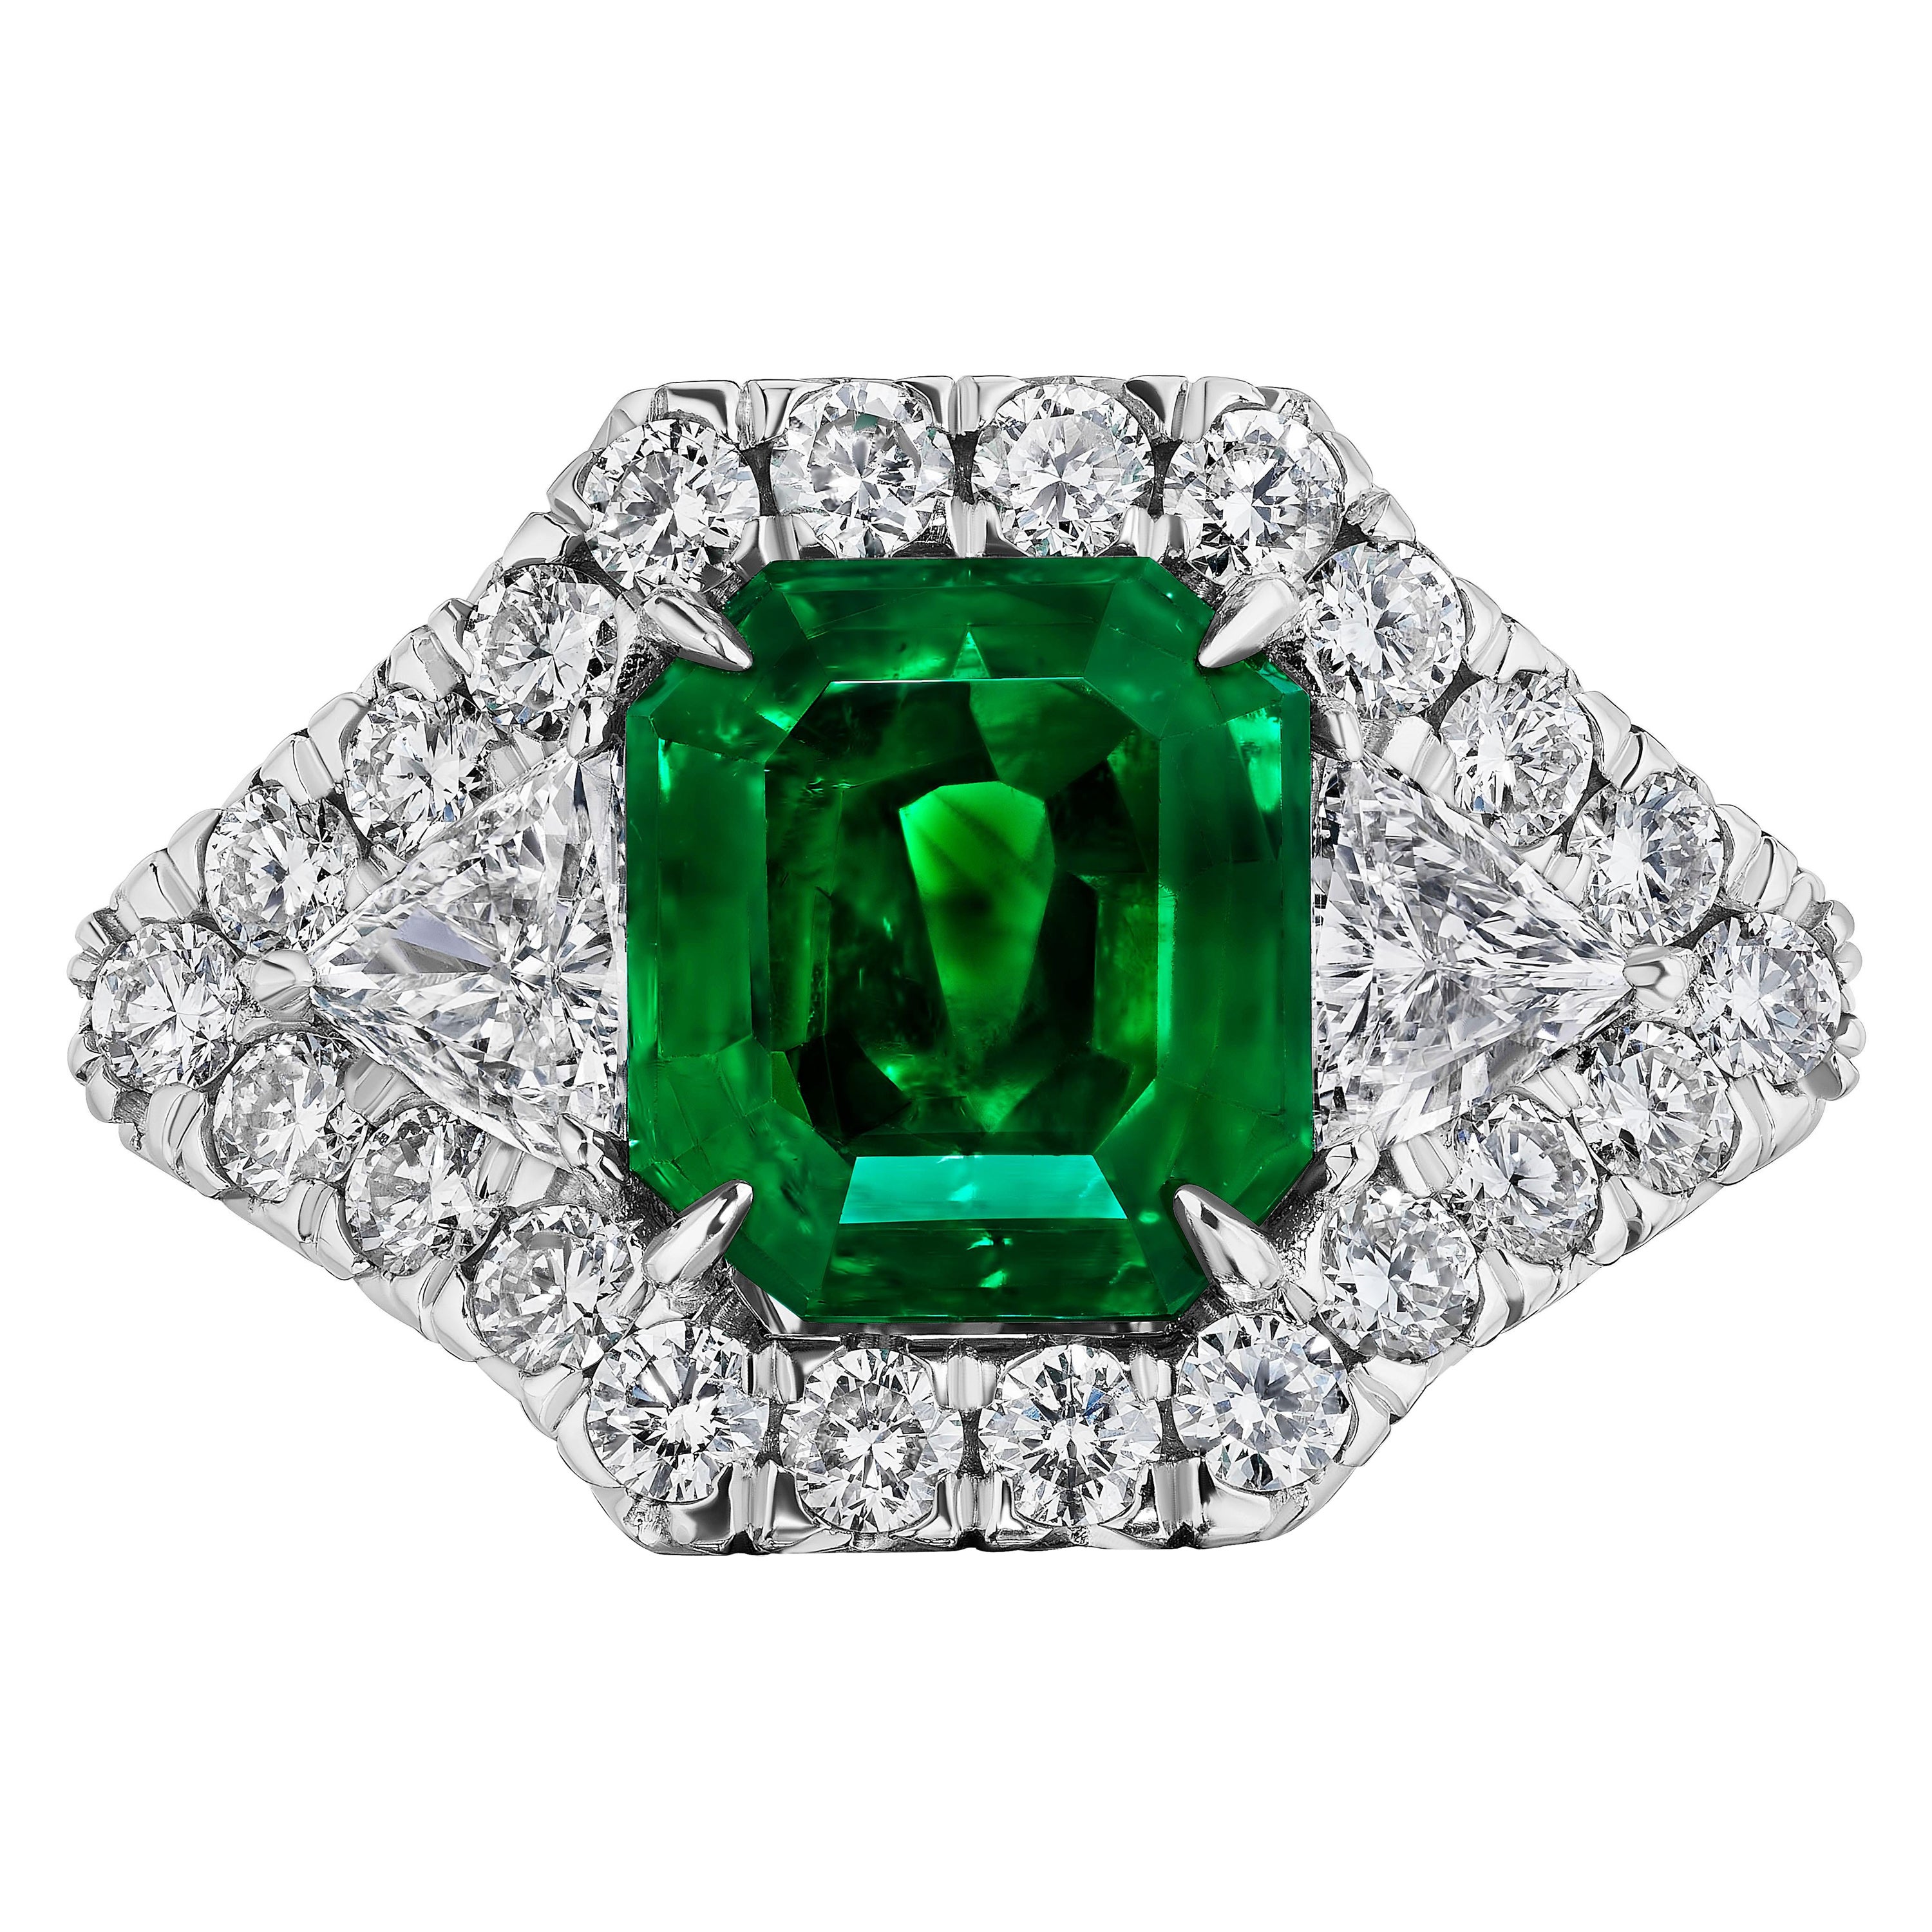 Auction - GIA Certified 4.99 Carat Colombian Emerald and 2.01 Carat Diamond Ring For Sale